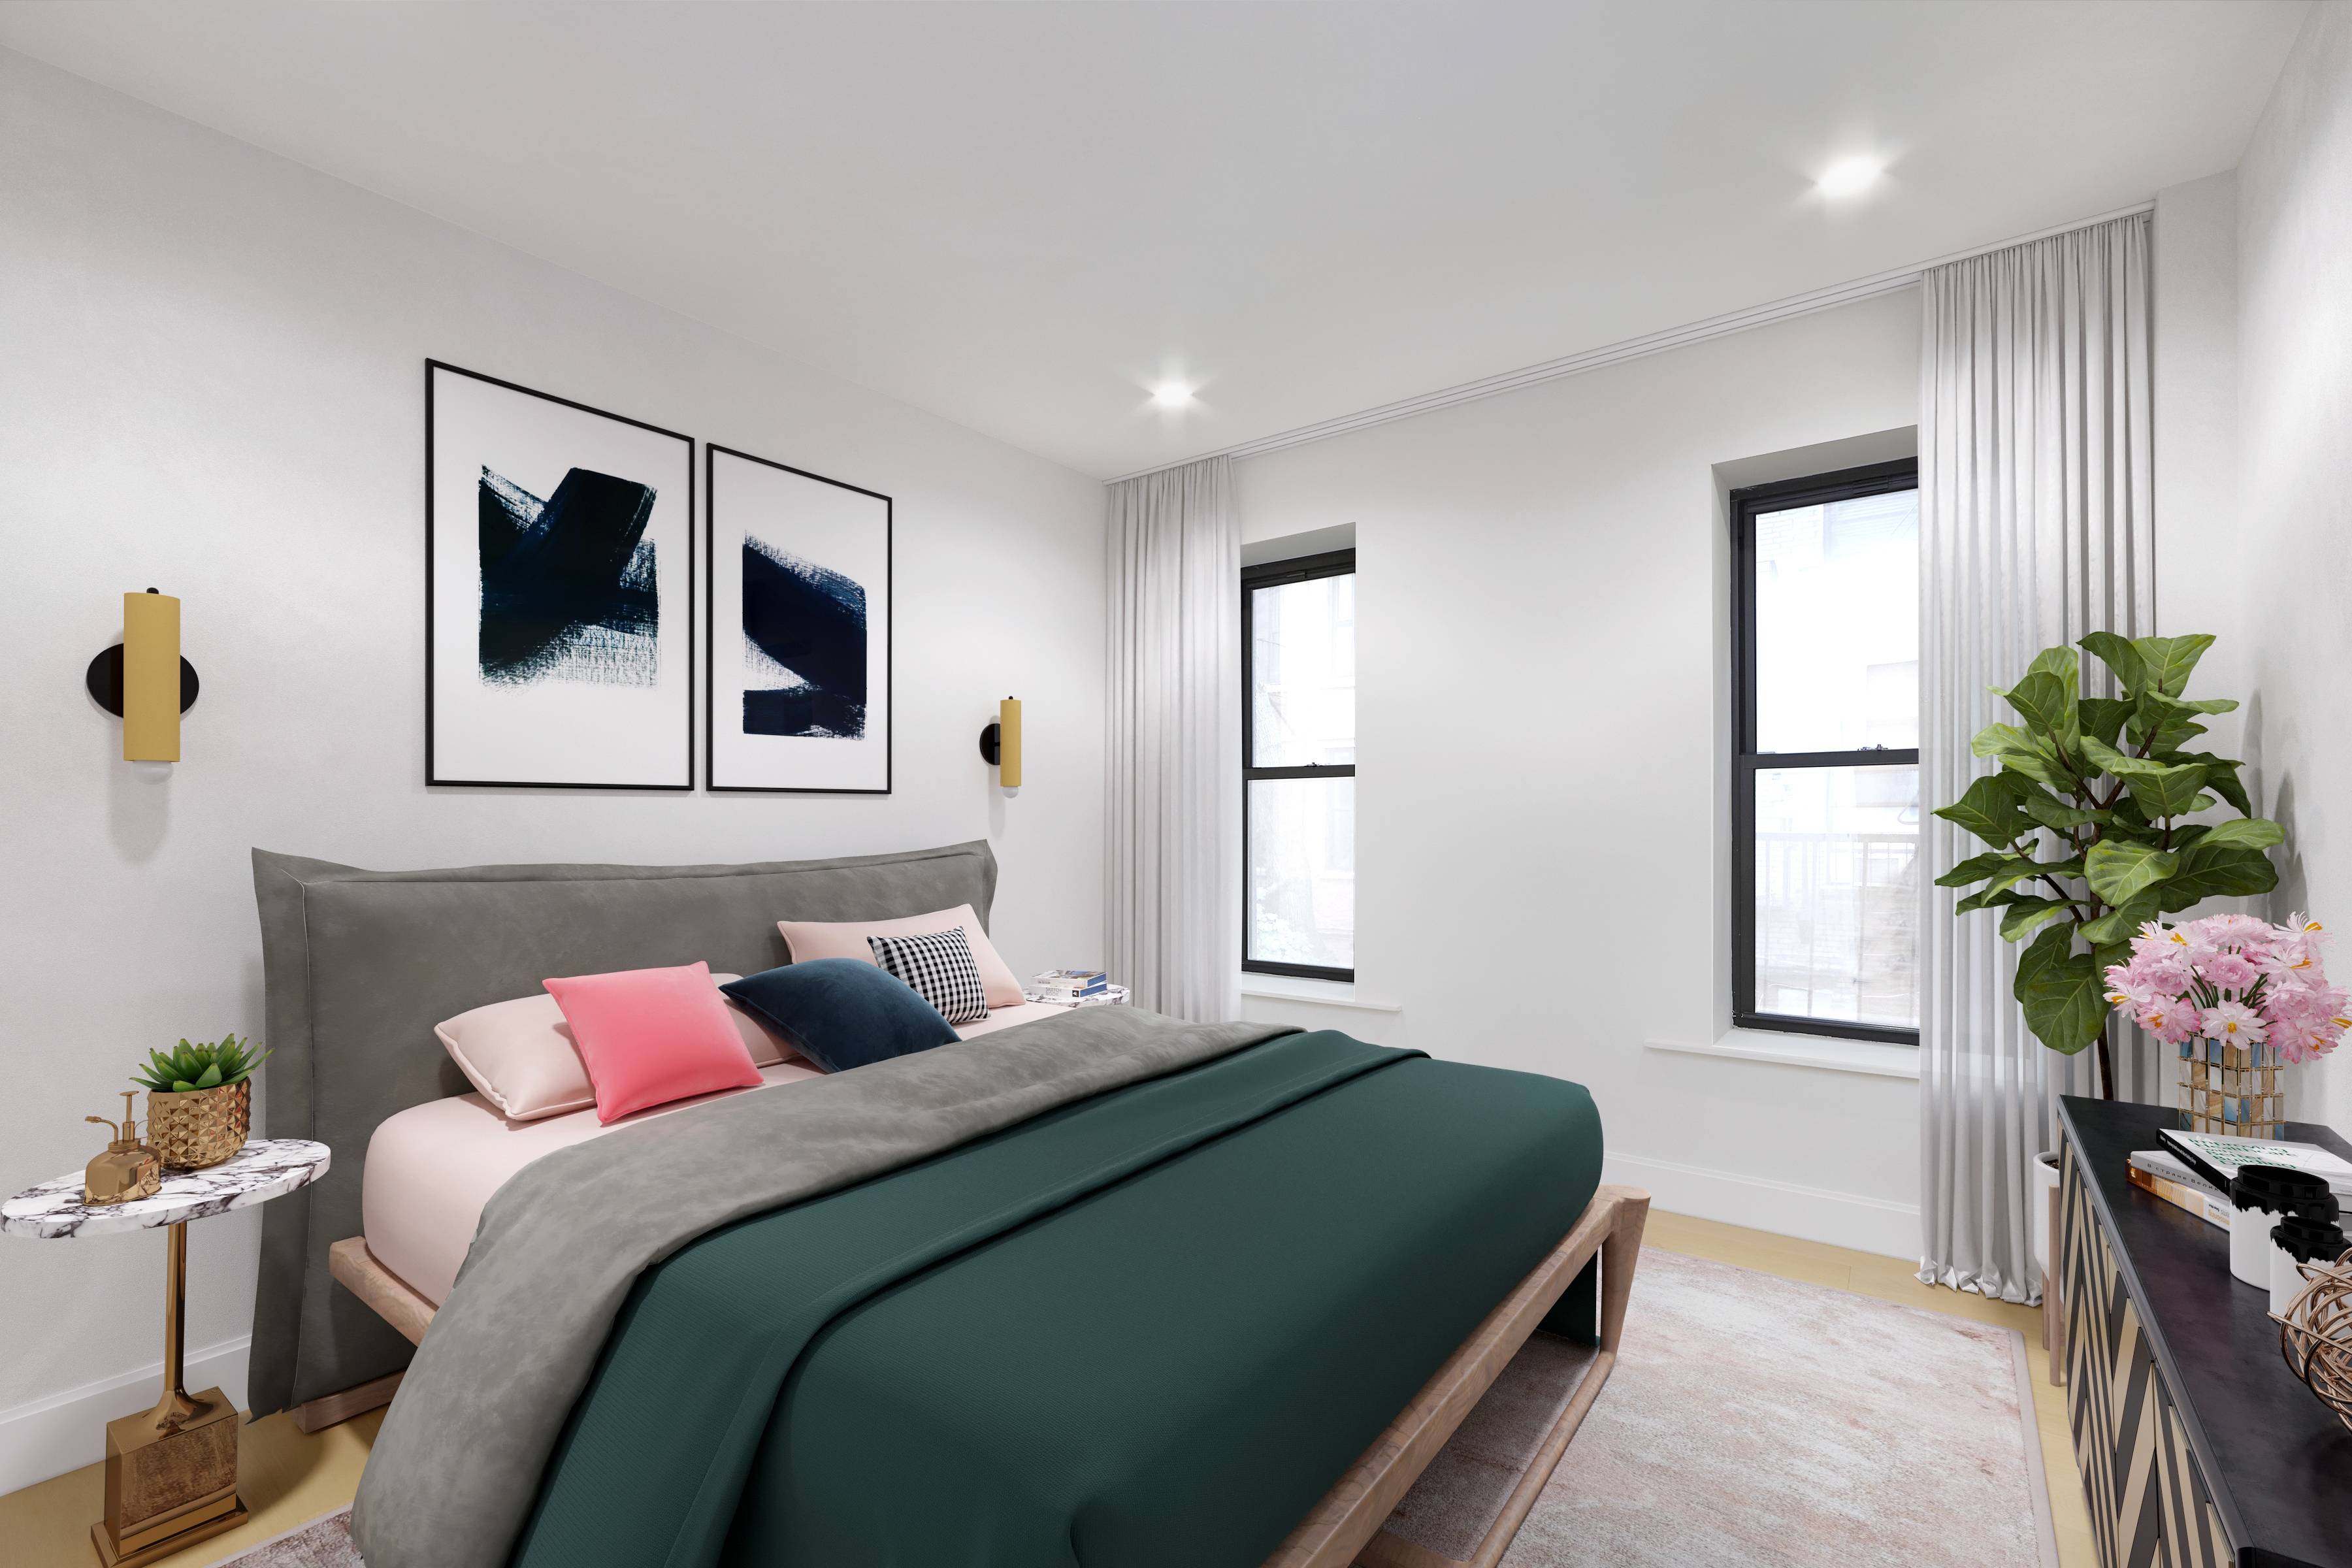 236 West 10th Street presents a rare opportunity to live in brand new residences on one of West Villages most coveted tree lined blocks !